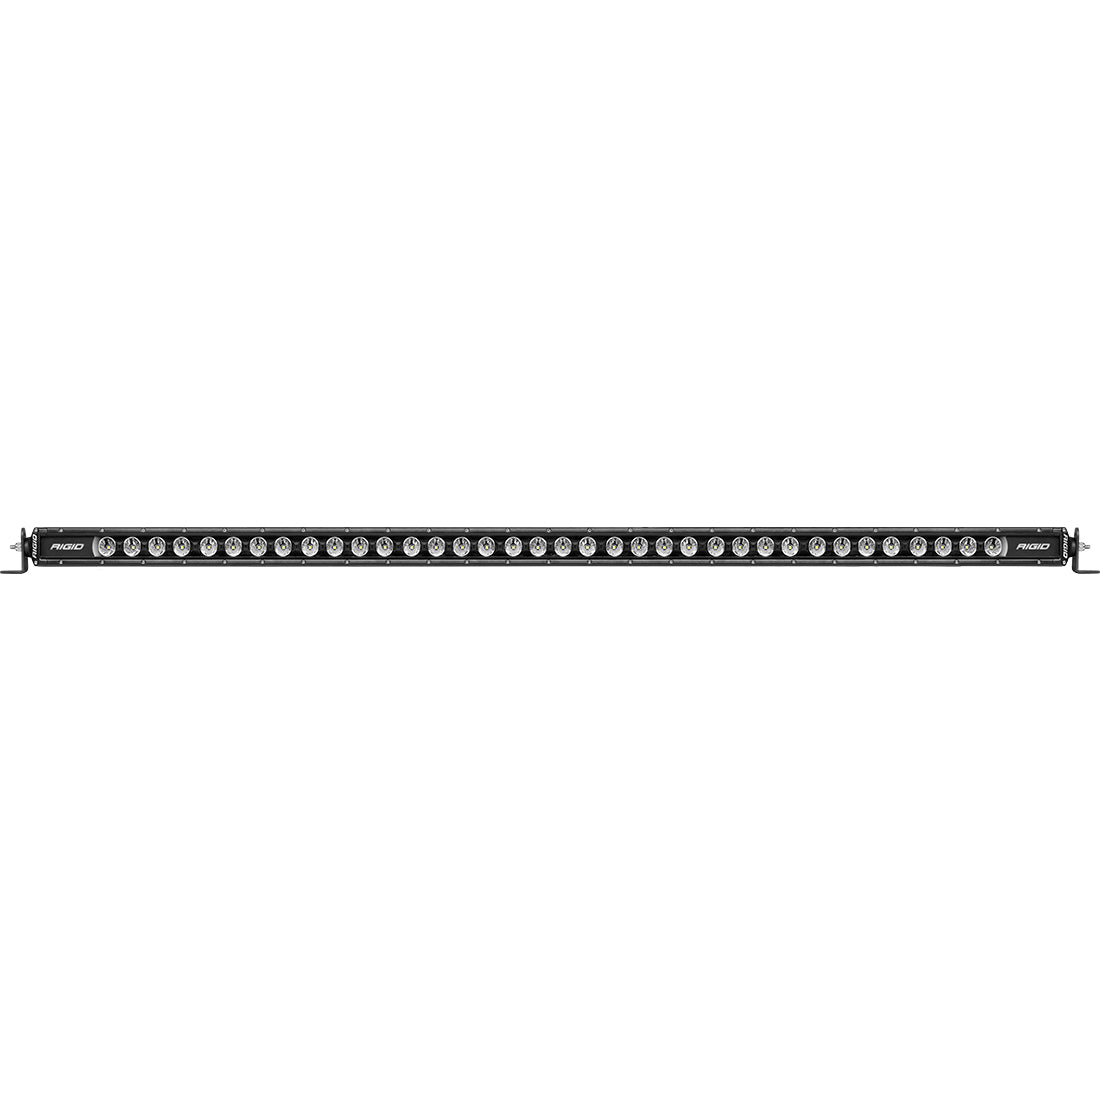 RIGID Industries Radiance Plus SR-Series Single Row LED Light Bar With 8 Backlight Options: Red Green Blue Light Blue Purple Amber White Or Rotating 50 Inch Length 250603